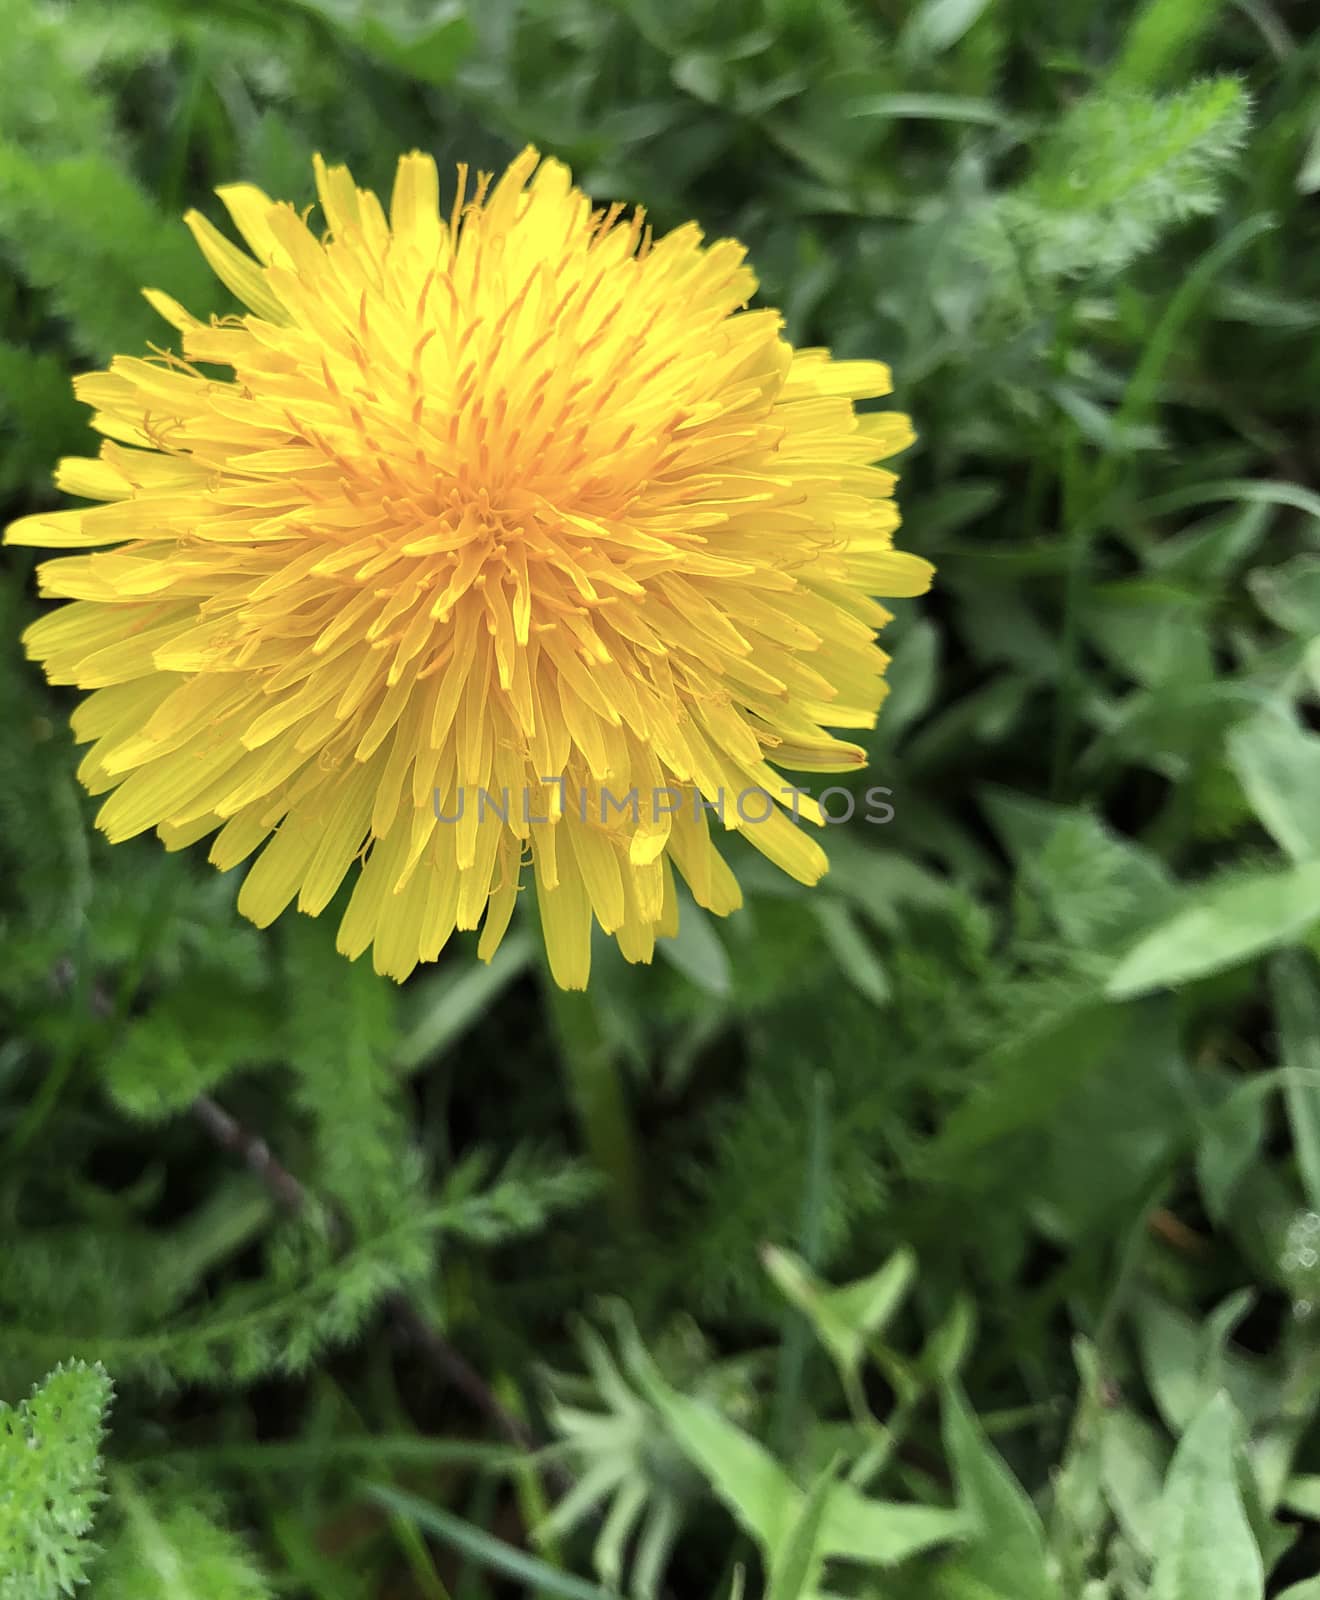 Dandelion blooming in a sunny spring day